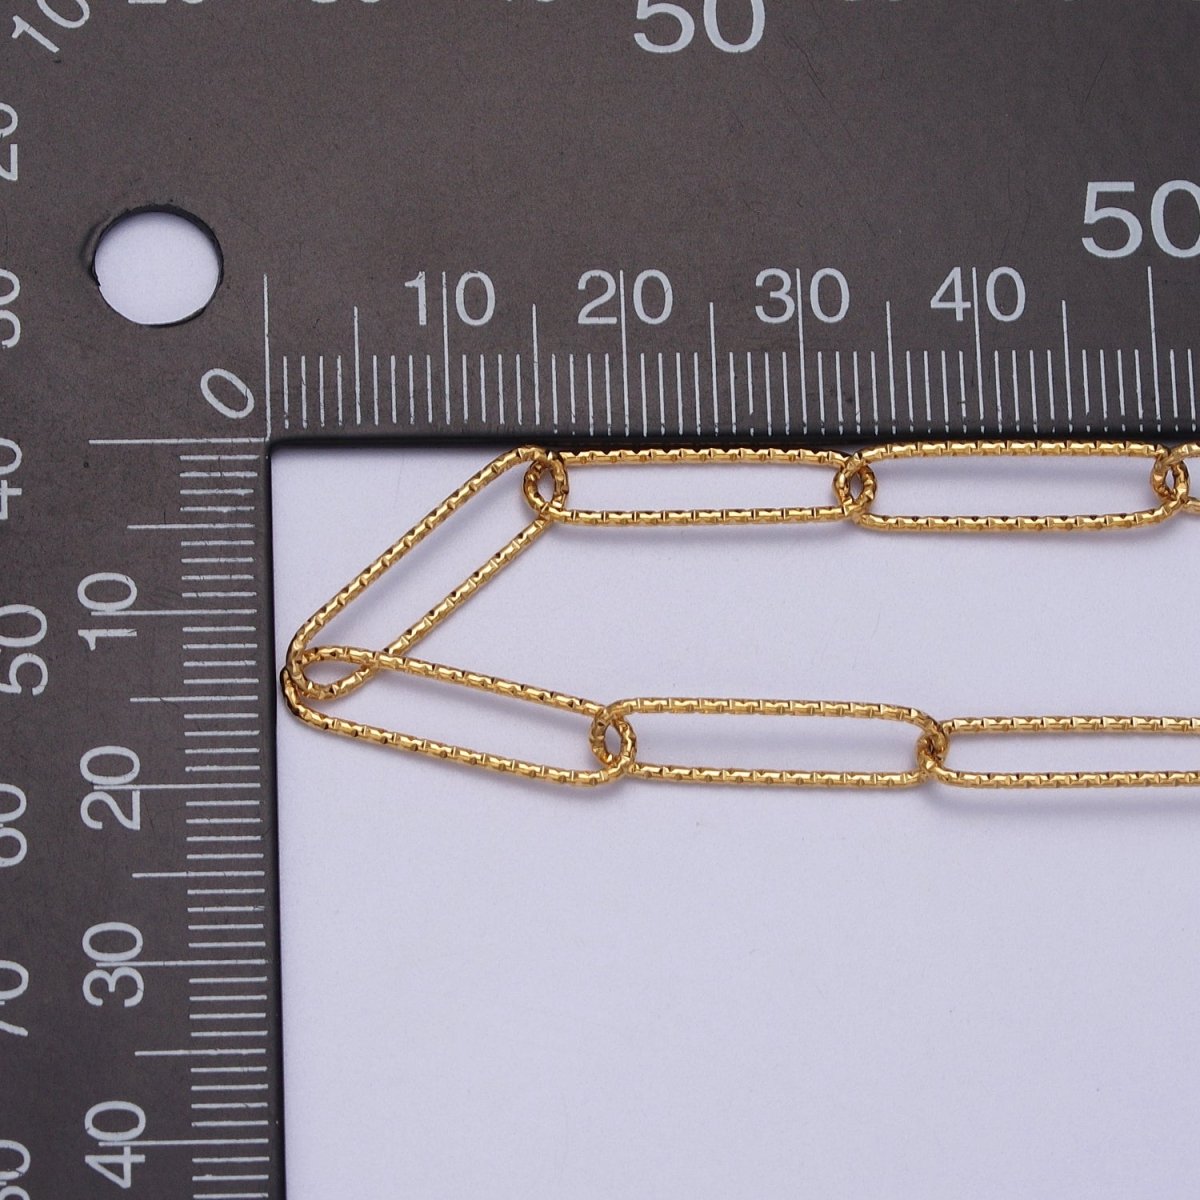 24K Gold Filled 5mm Textured Paperclip Gold, Silver Unfinished Chain | ROLL-927 ROLL-928 Clearance Pricing - DLUXCA